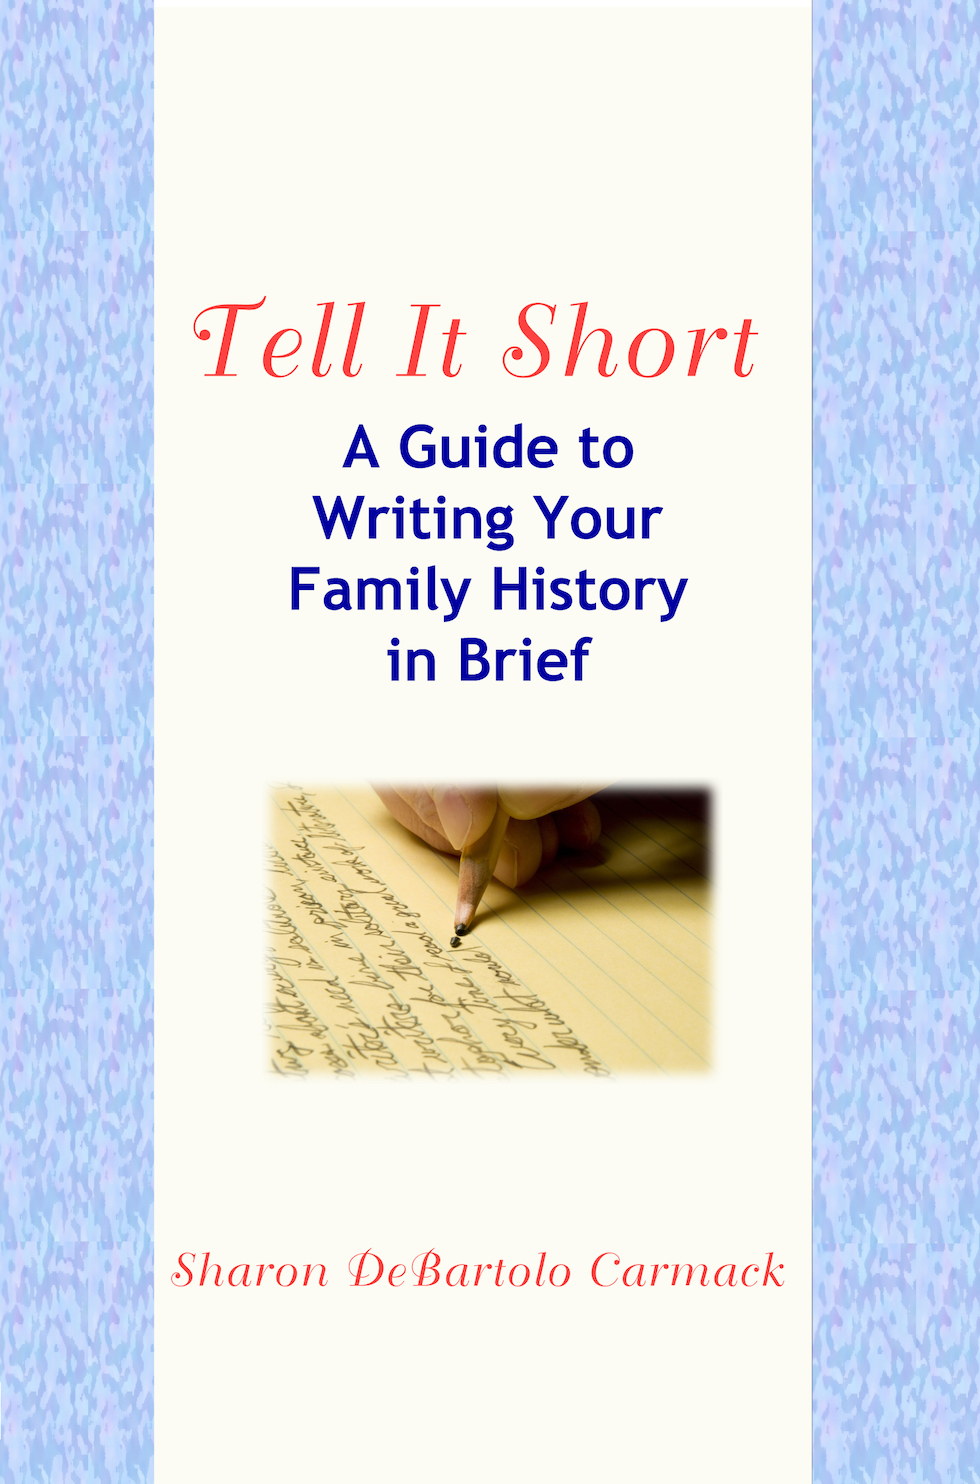 Tell It Short: A Guide to Writing Your Family History in Brief